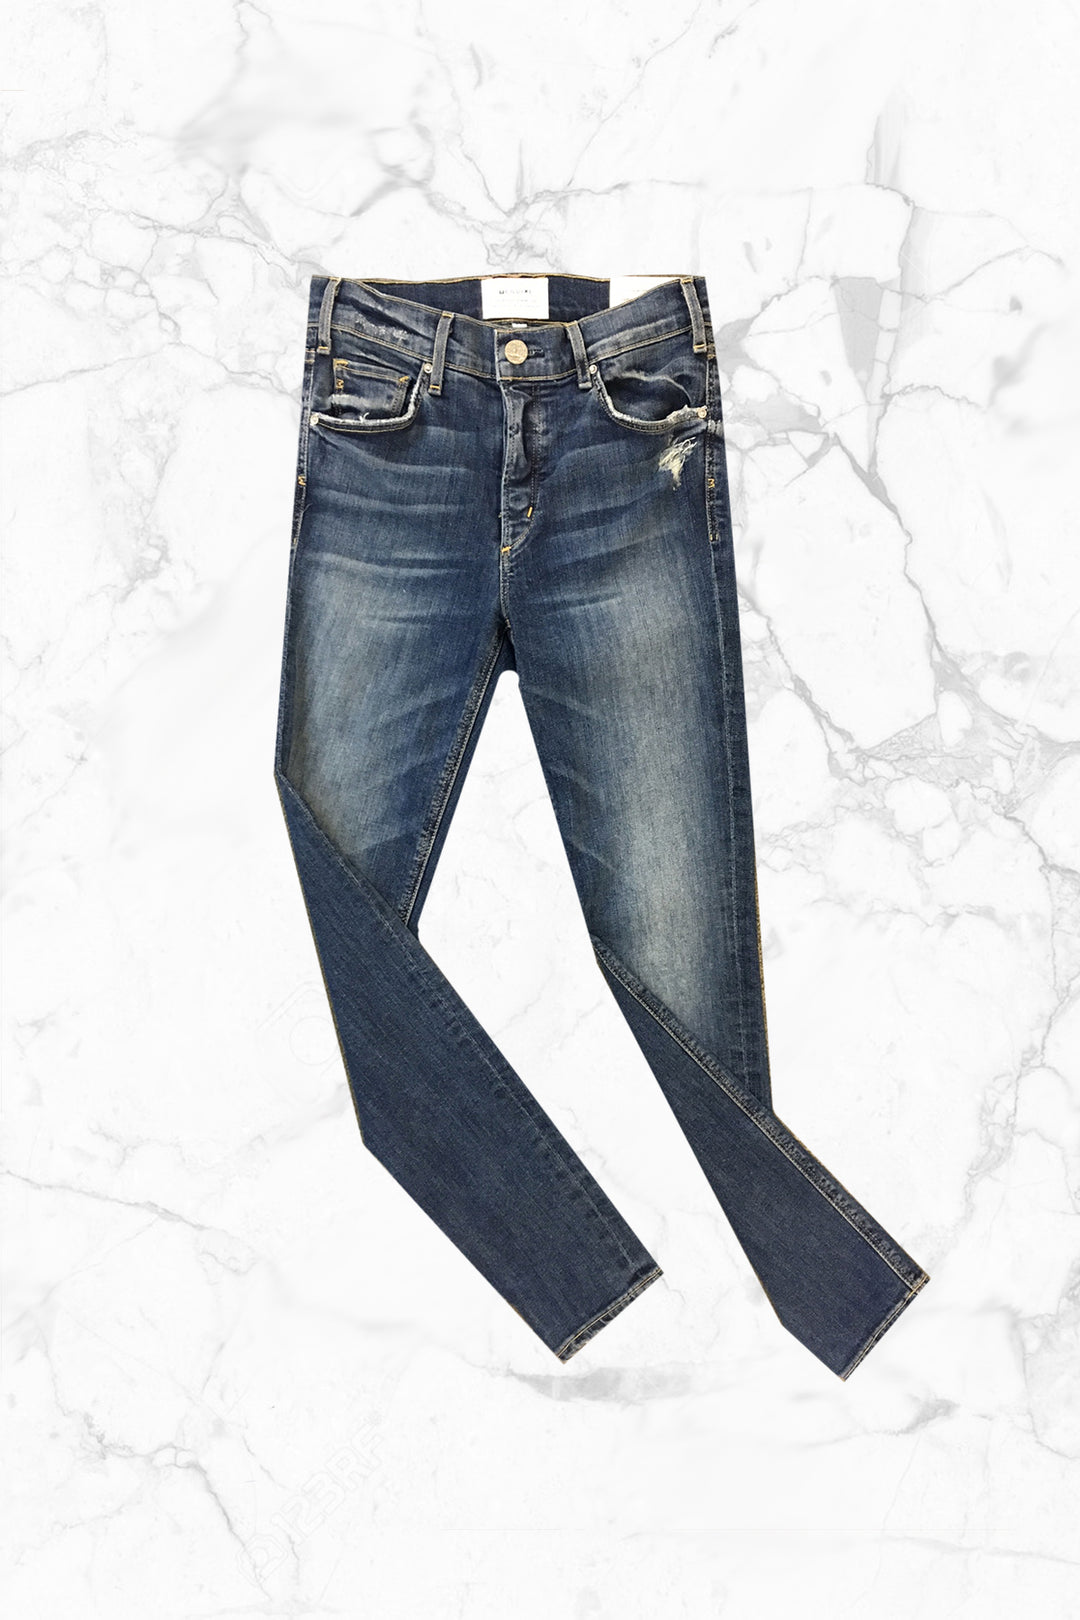 McGuire - High Rise Newton Skinny w/ Button Fly in Sampaio